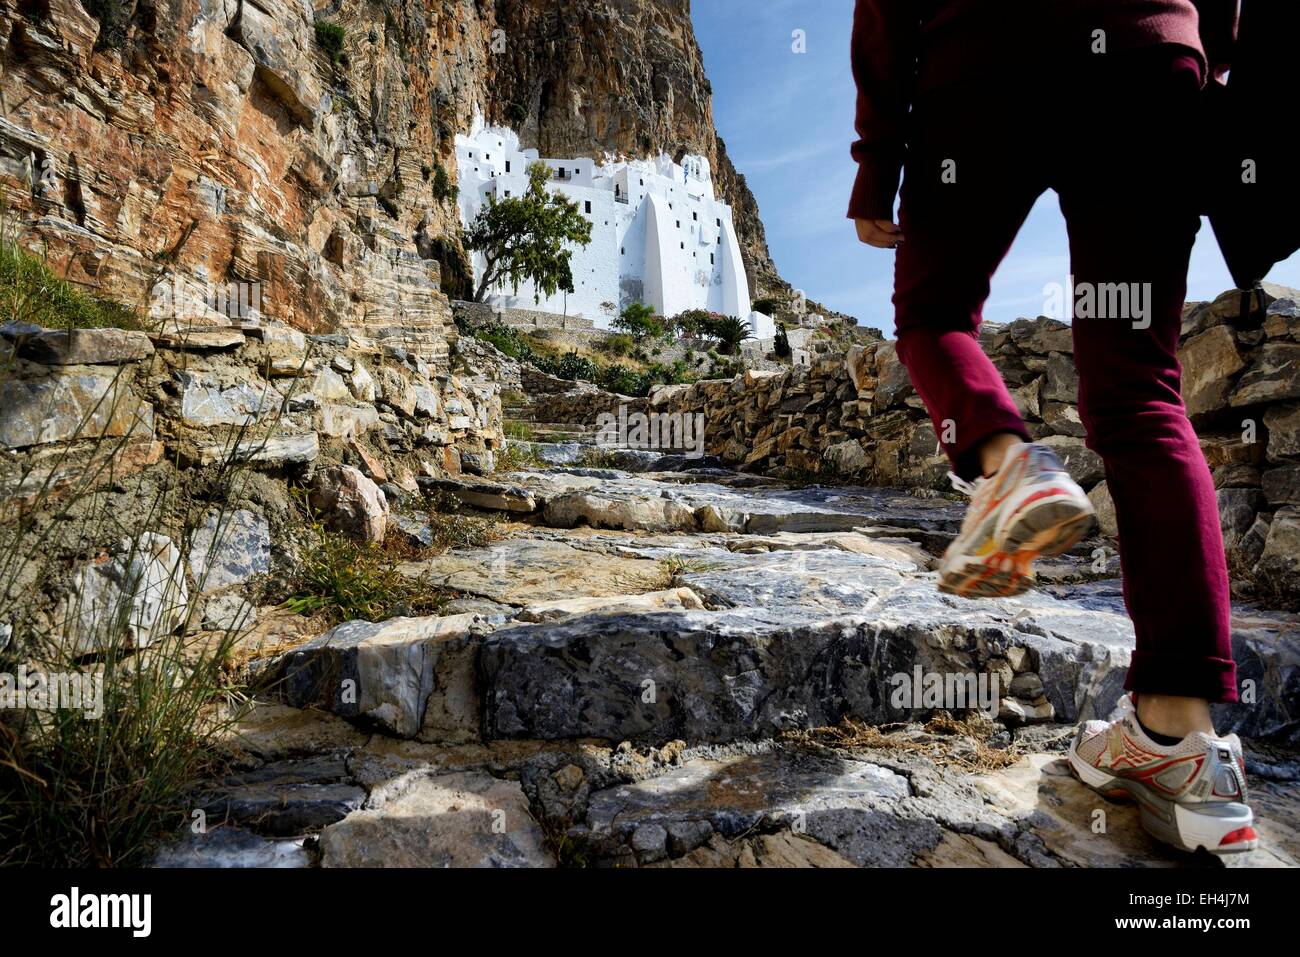 Greece, Cyclades, Amorgos island, woman's leg climbing up the trail to the monastery of Panagia Hozoviotissa (Moni Hozoviotissis, Chozoviotissa) Stock Photo